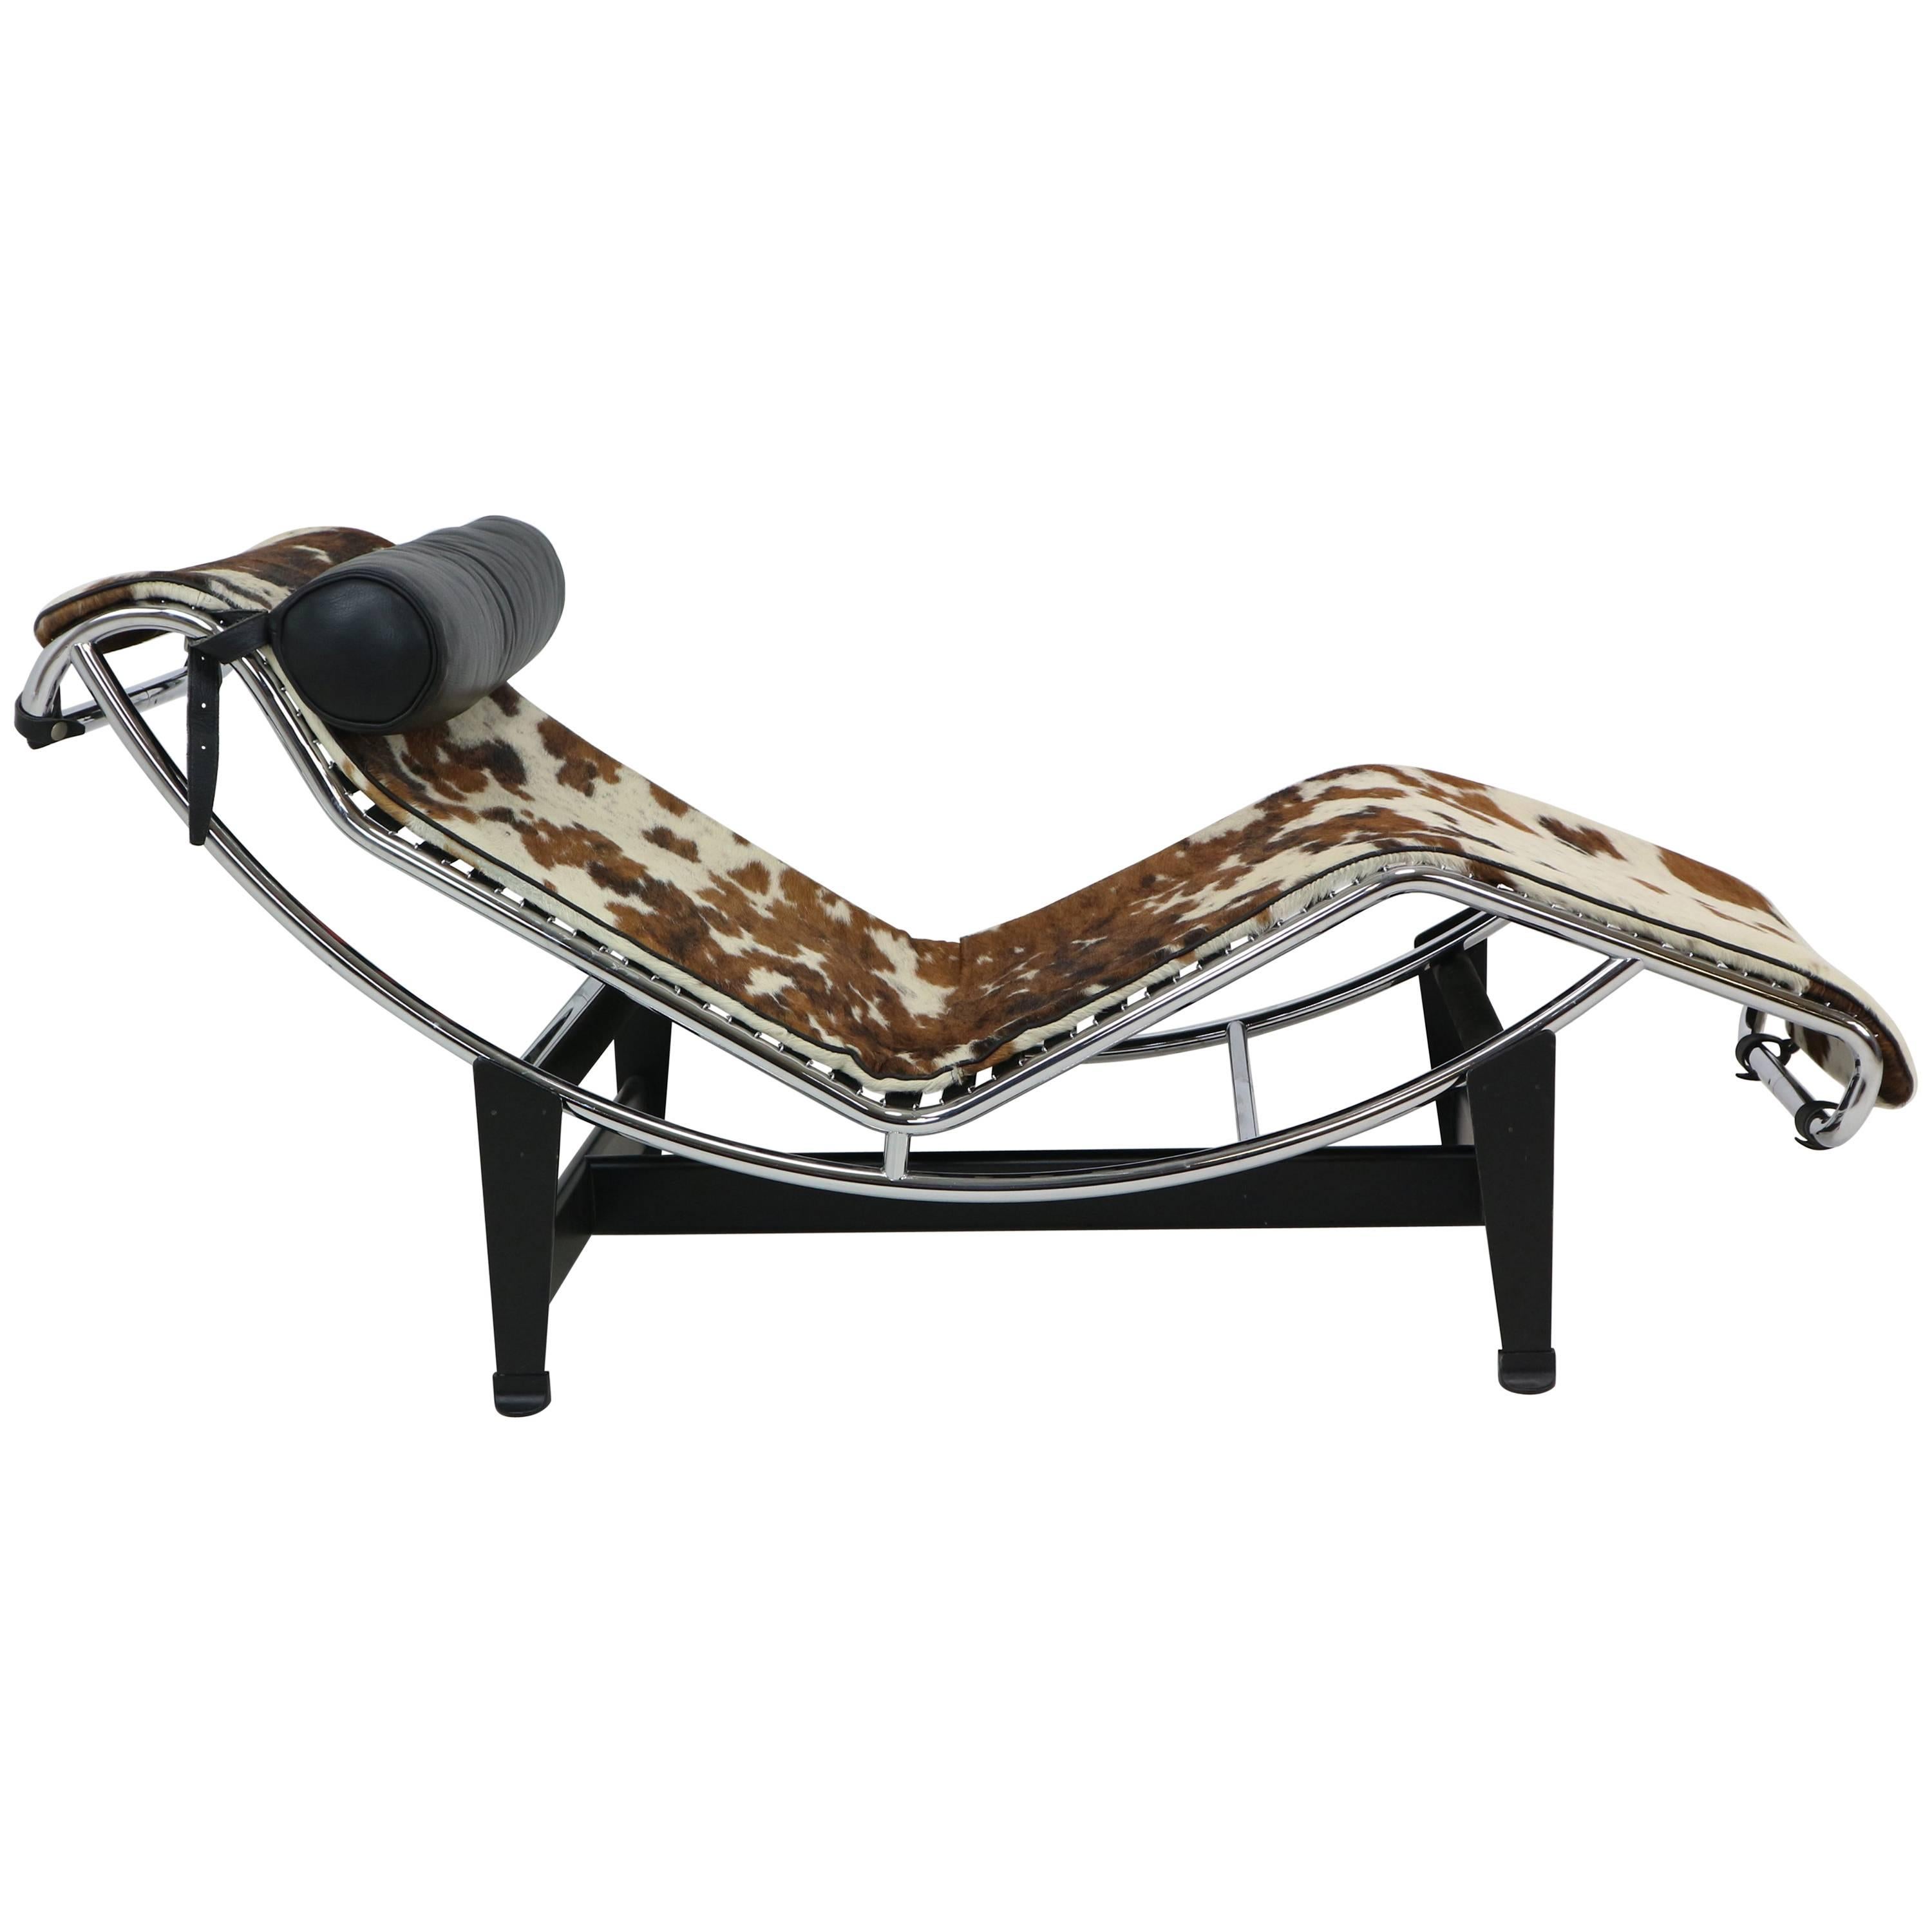 Chaise Longue "LC4" Le Corbusier, Cassina Edition, Ponyskin, Perfect  Condition at 1stDibs | lc4 le corbusier, pony skin chaise longue, le  corbusier chaise longue pony skin